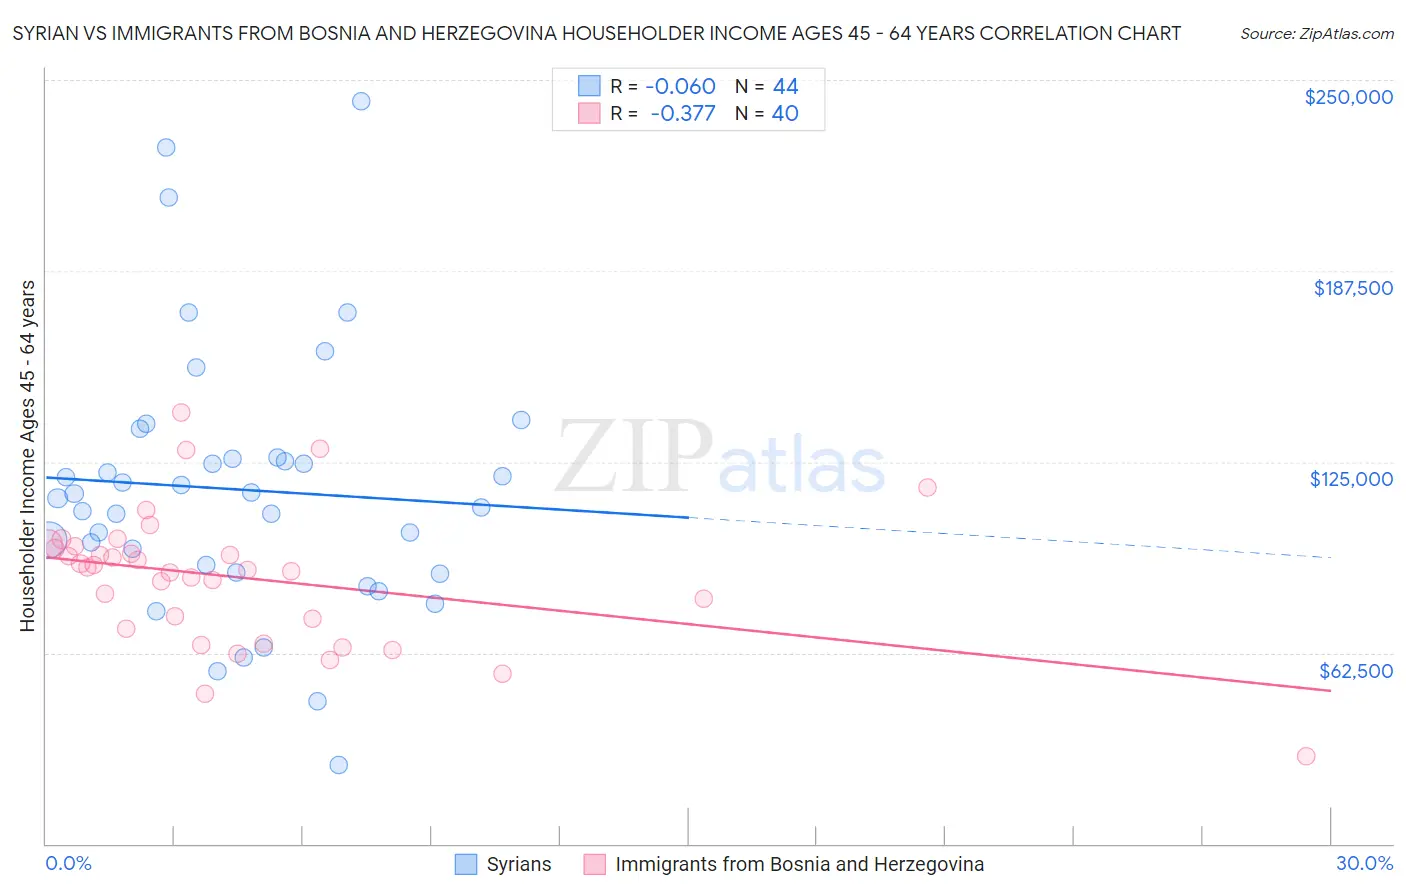 Syrian vs Immigrants from Bosnia and Herzegovina Householder Income Ages 45 - 64 years